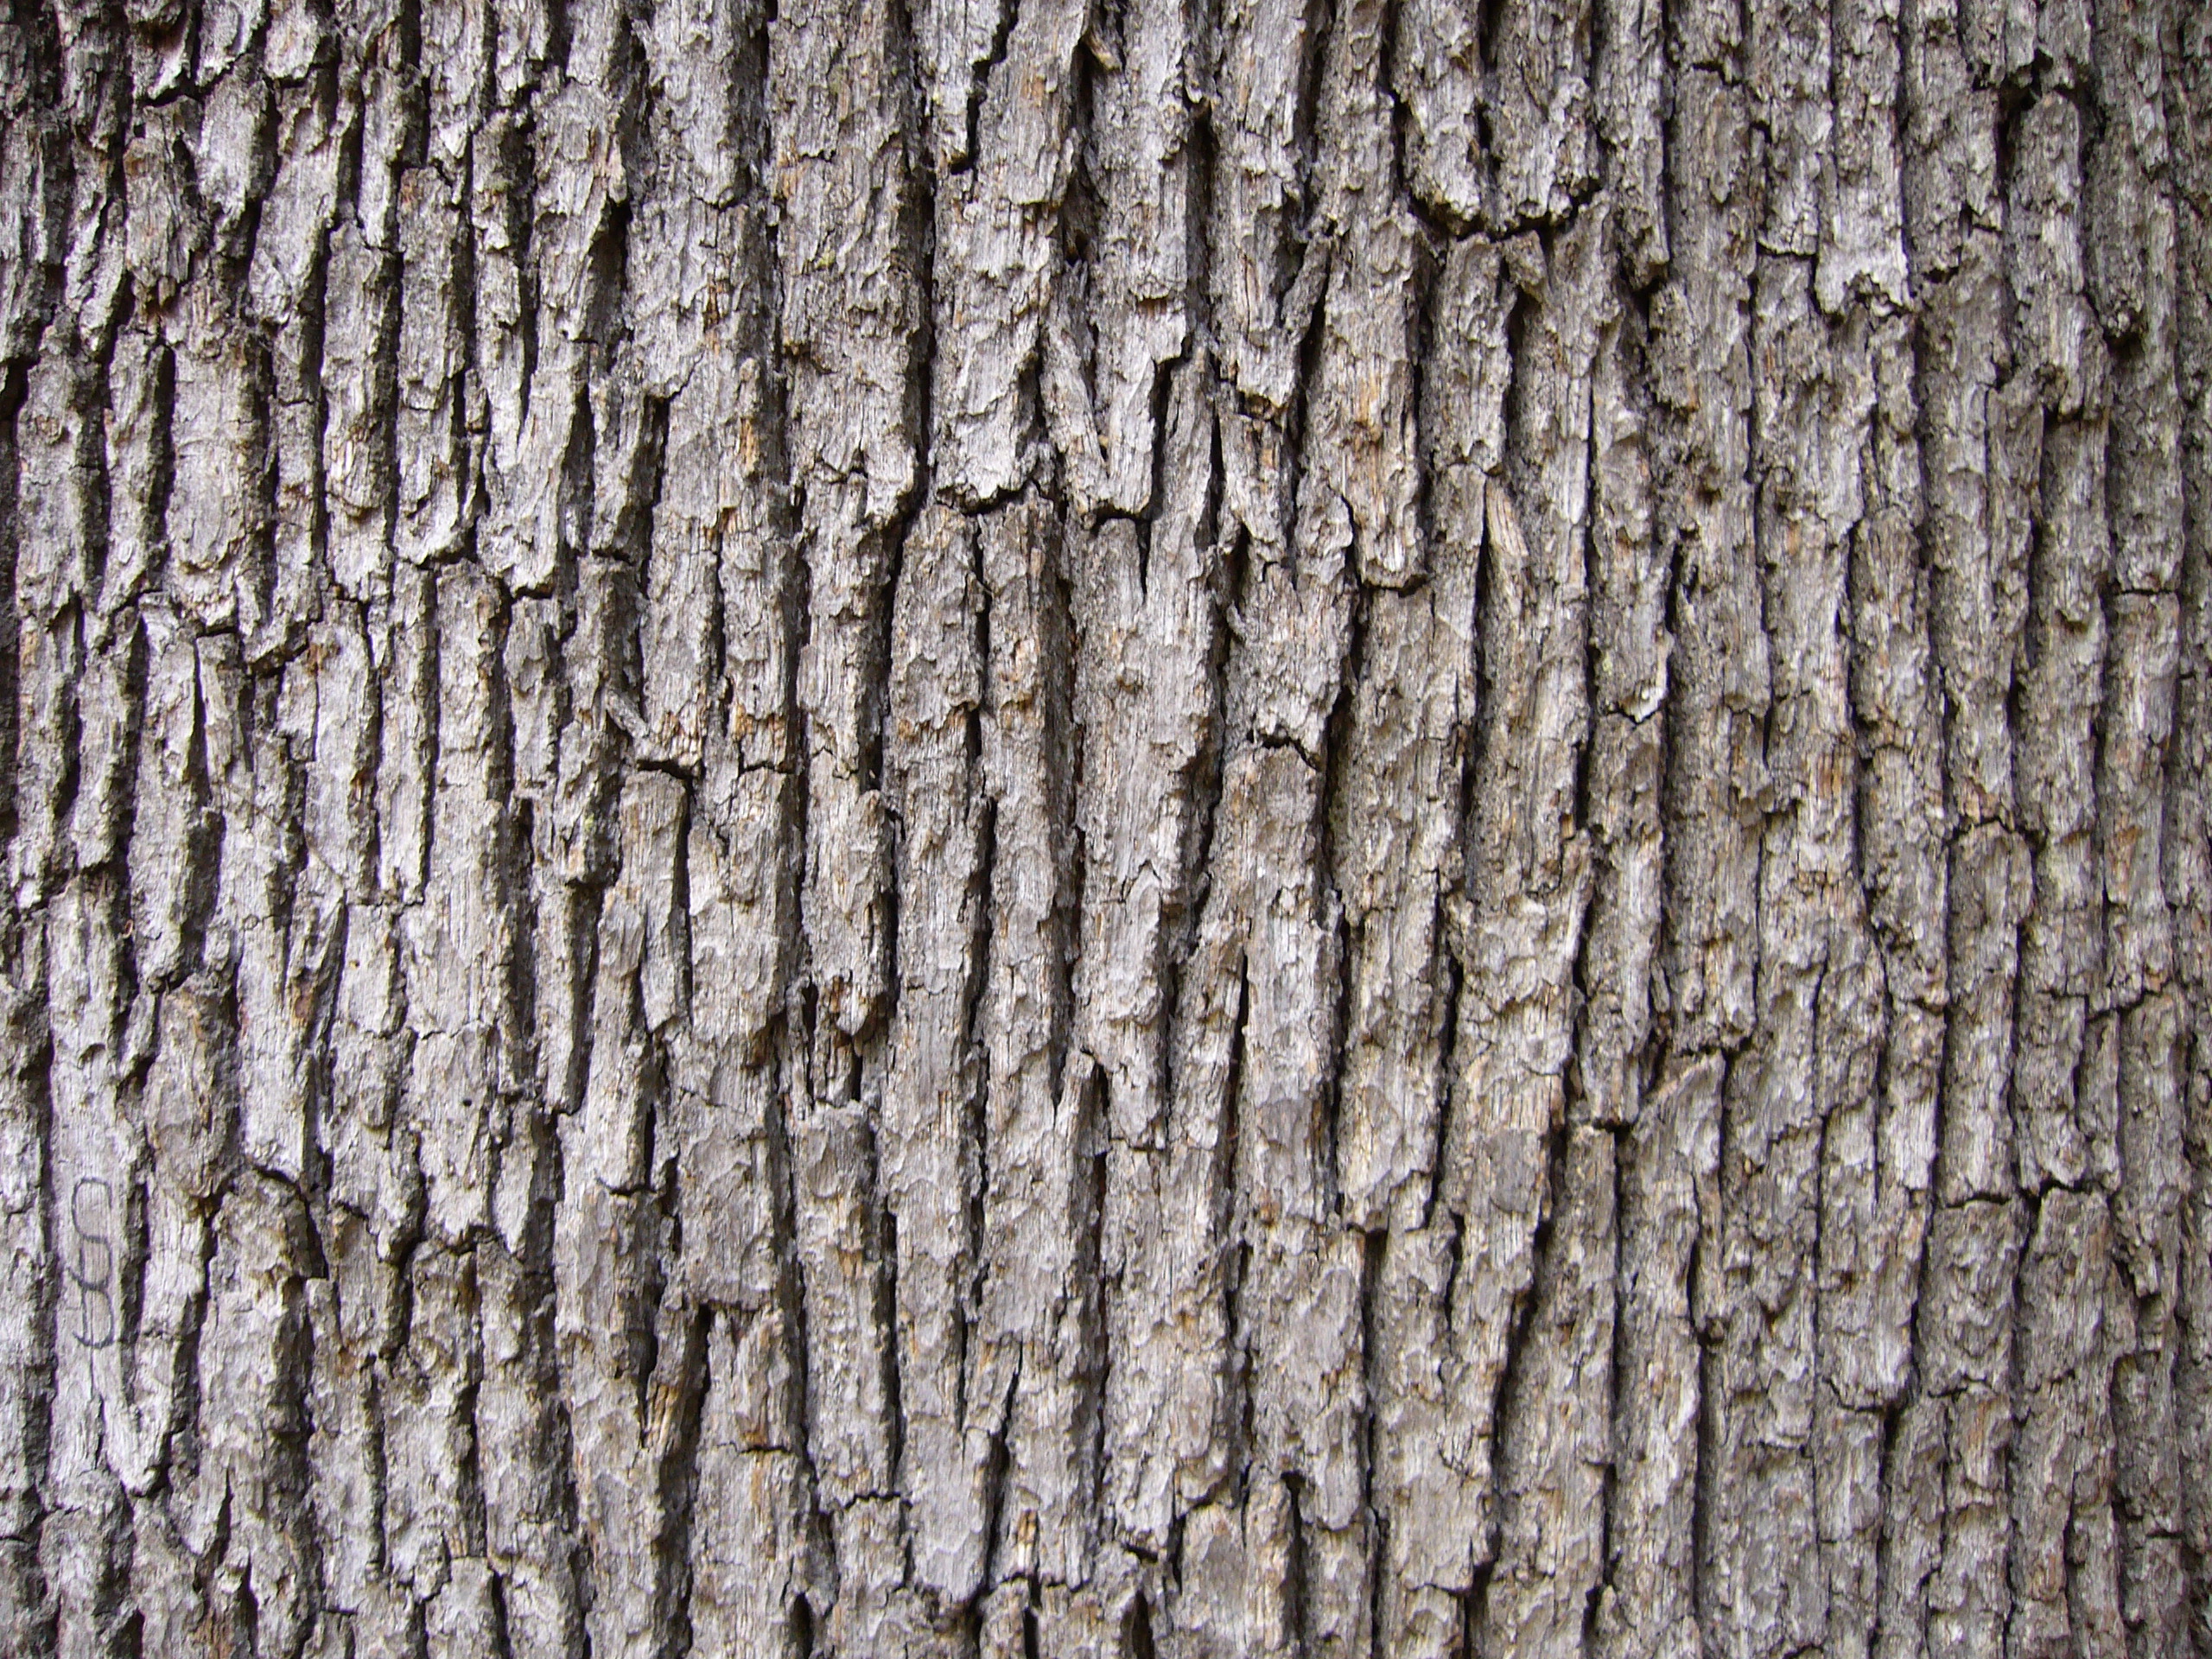 MTE offers the best wood byproducts like bark in Wisconsin